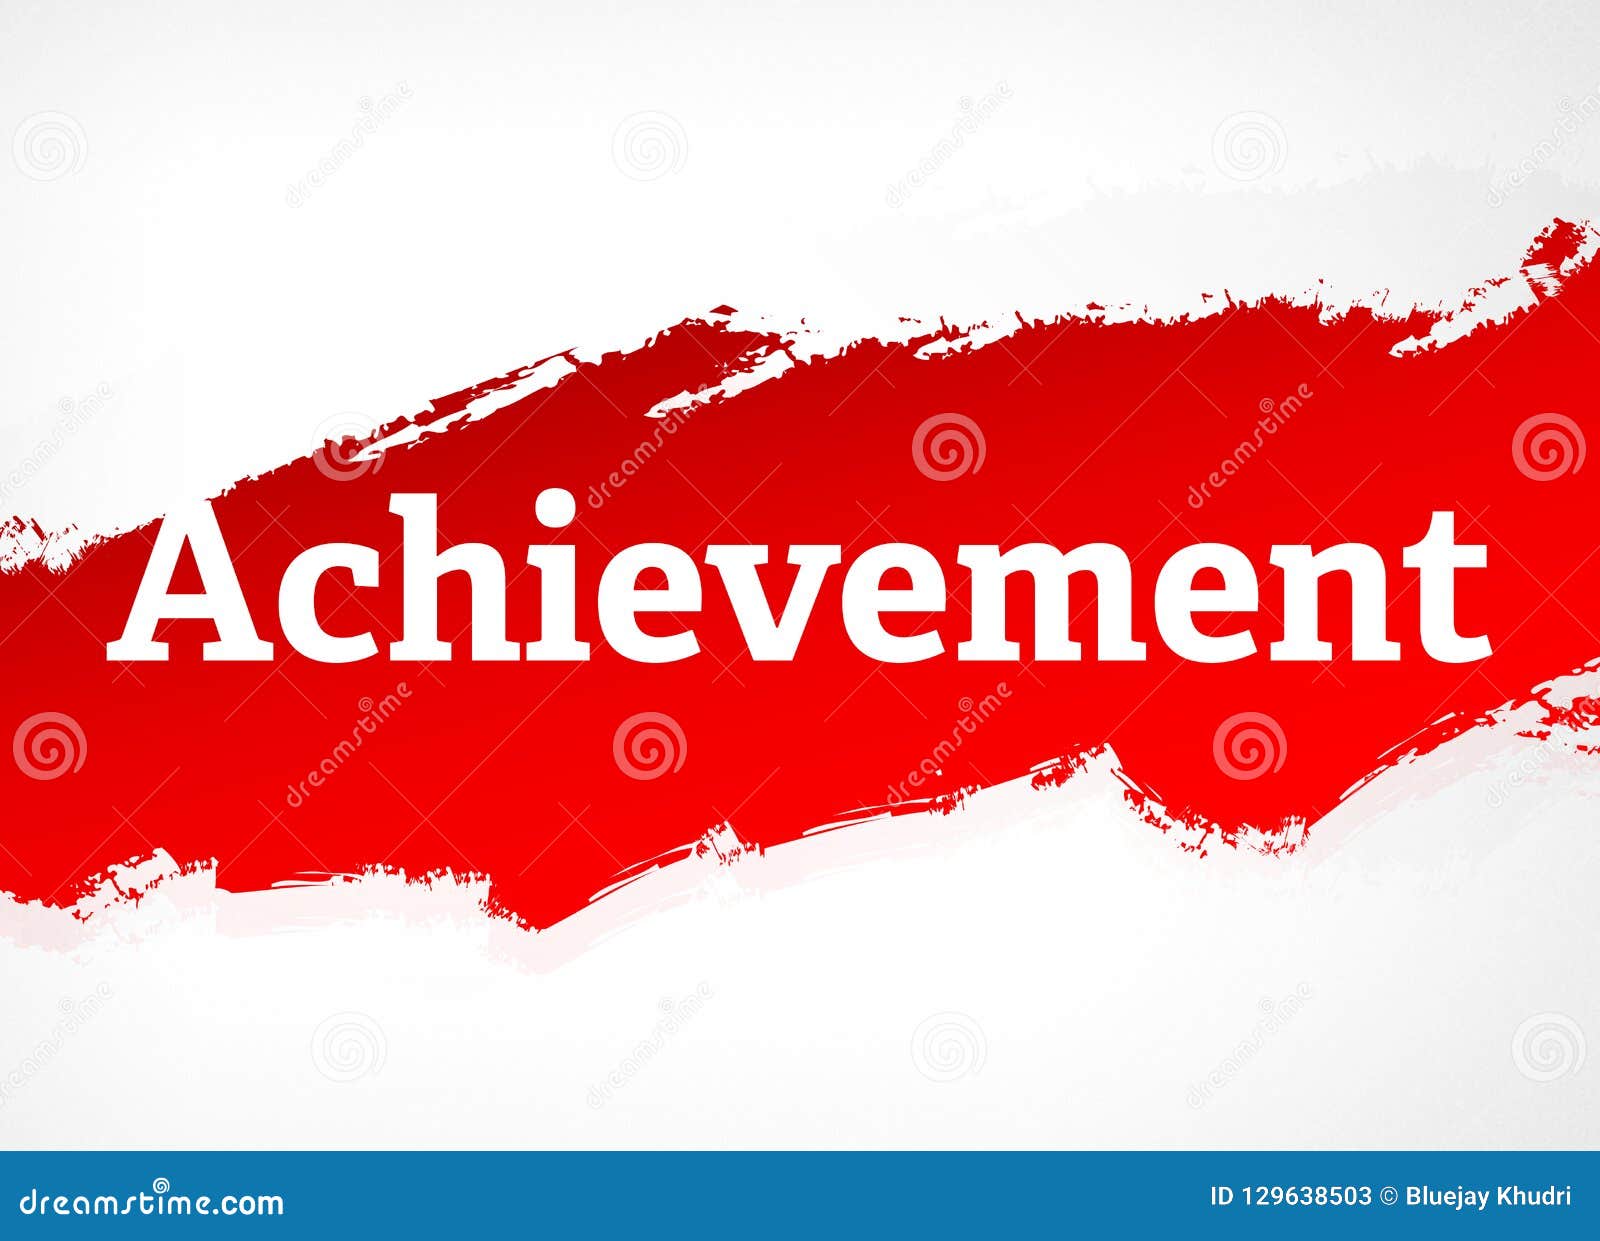 achievement red brush abstract background 